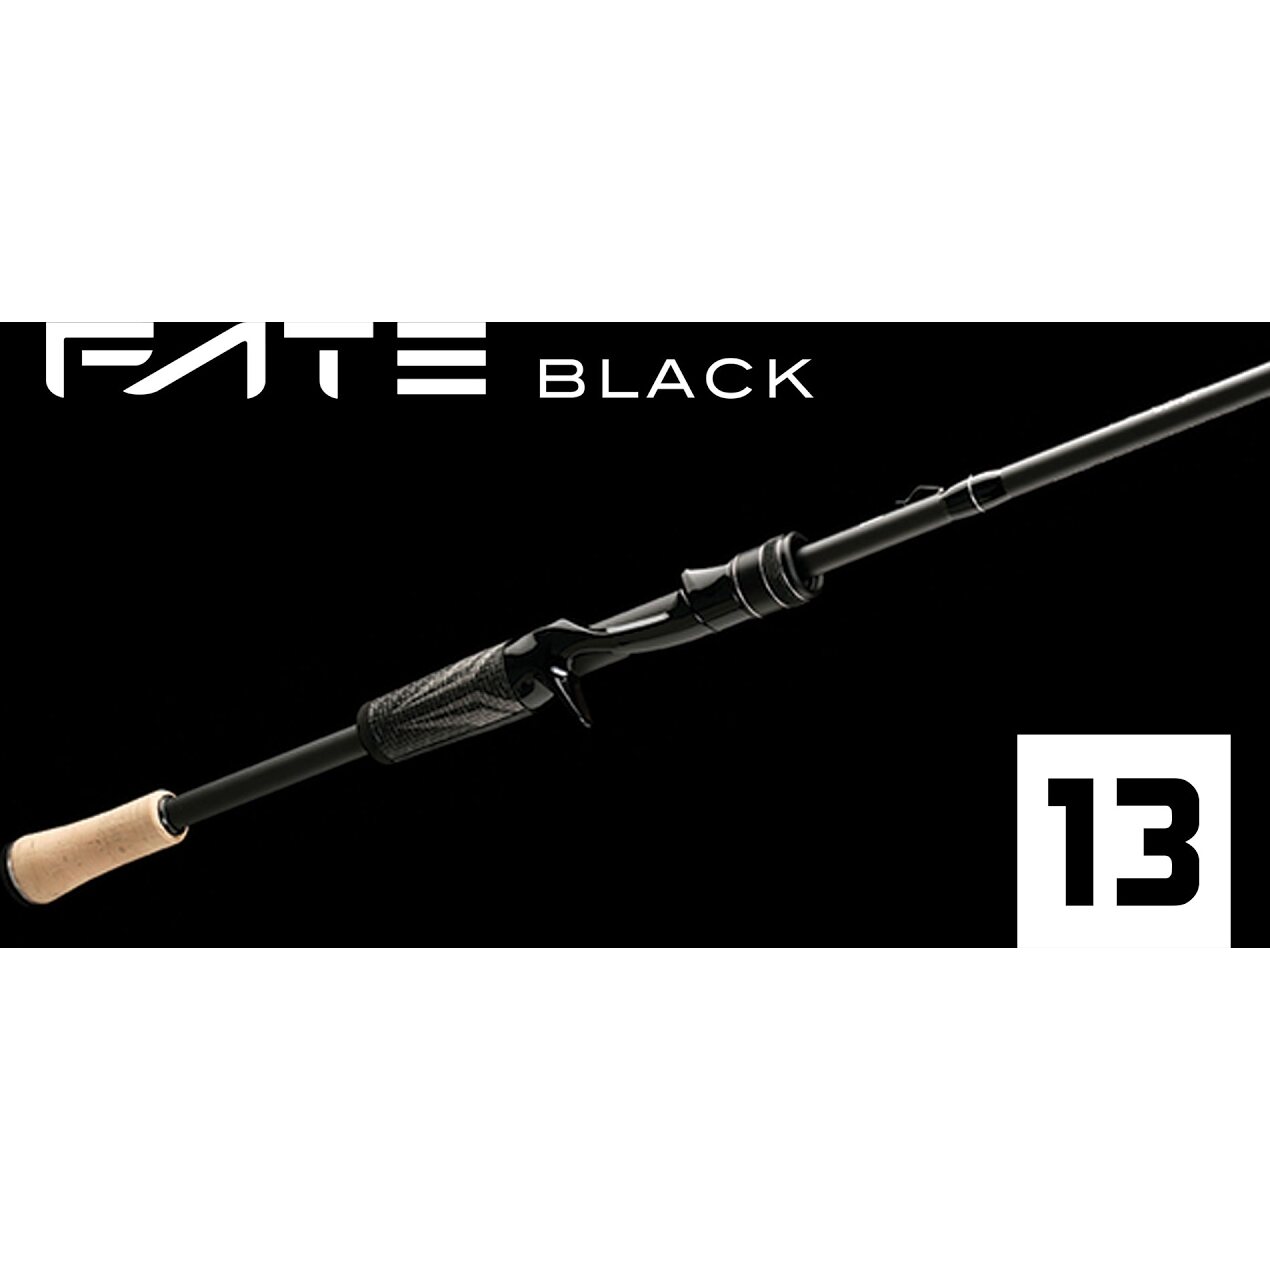 13 Fishing Introduces The Defy Black Rod 